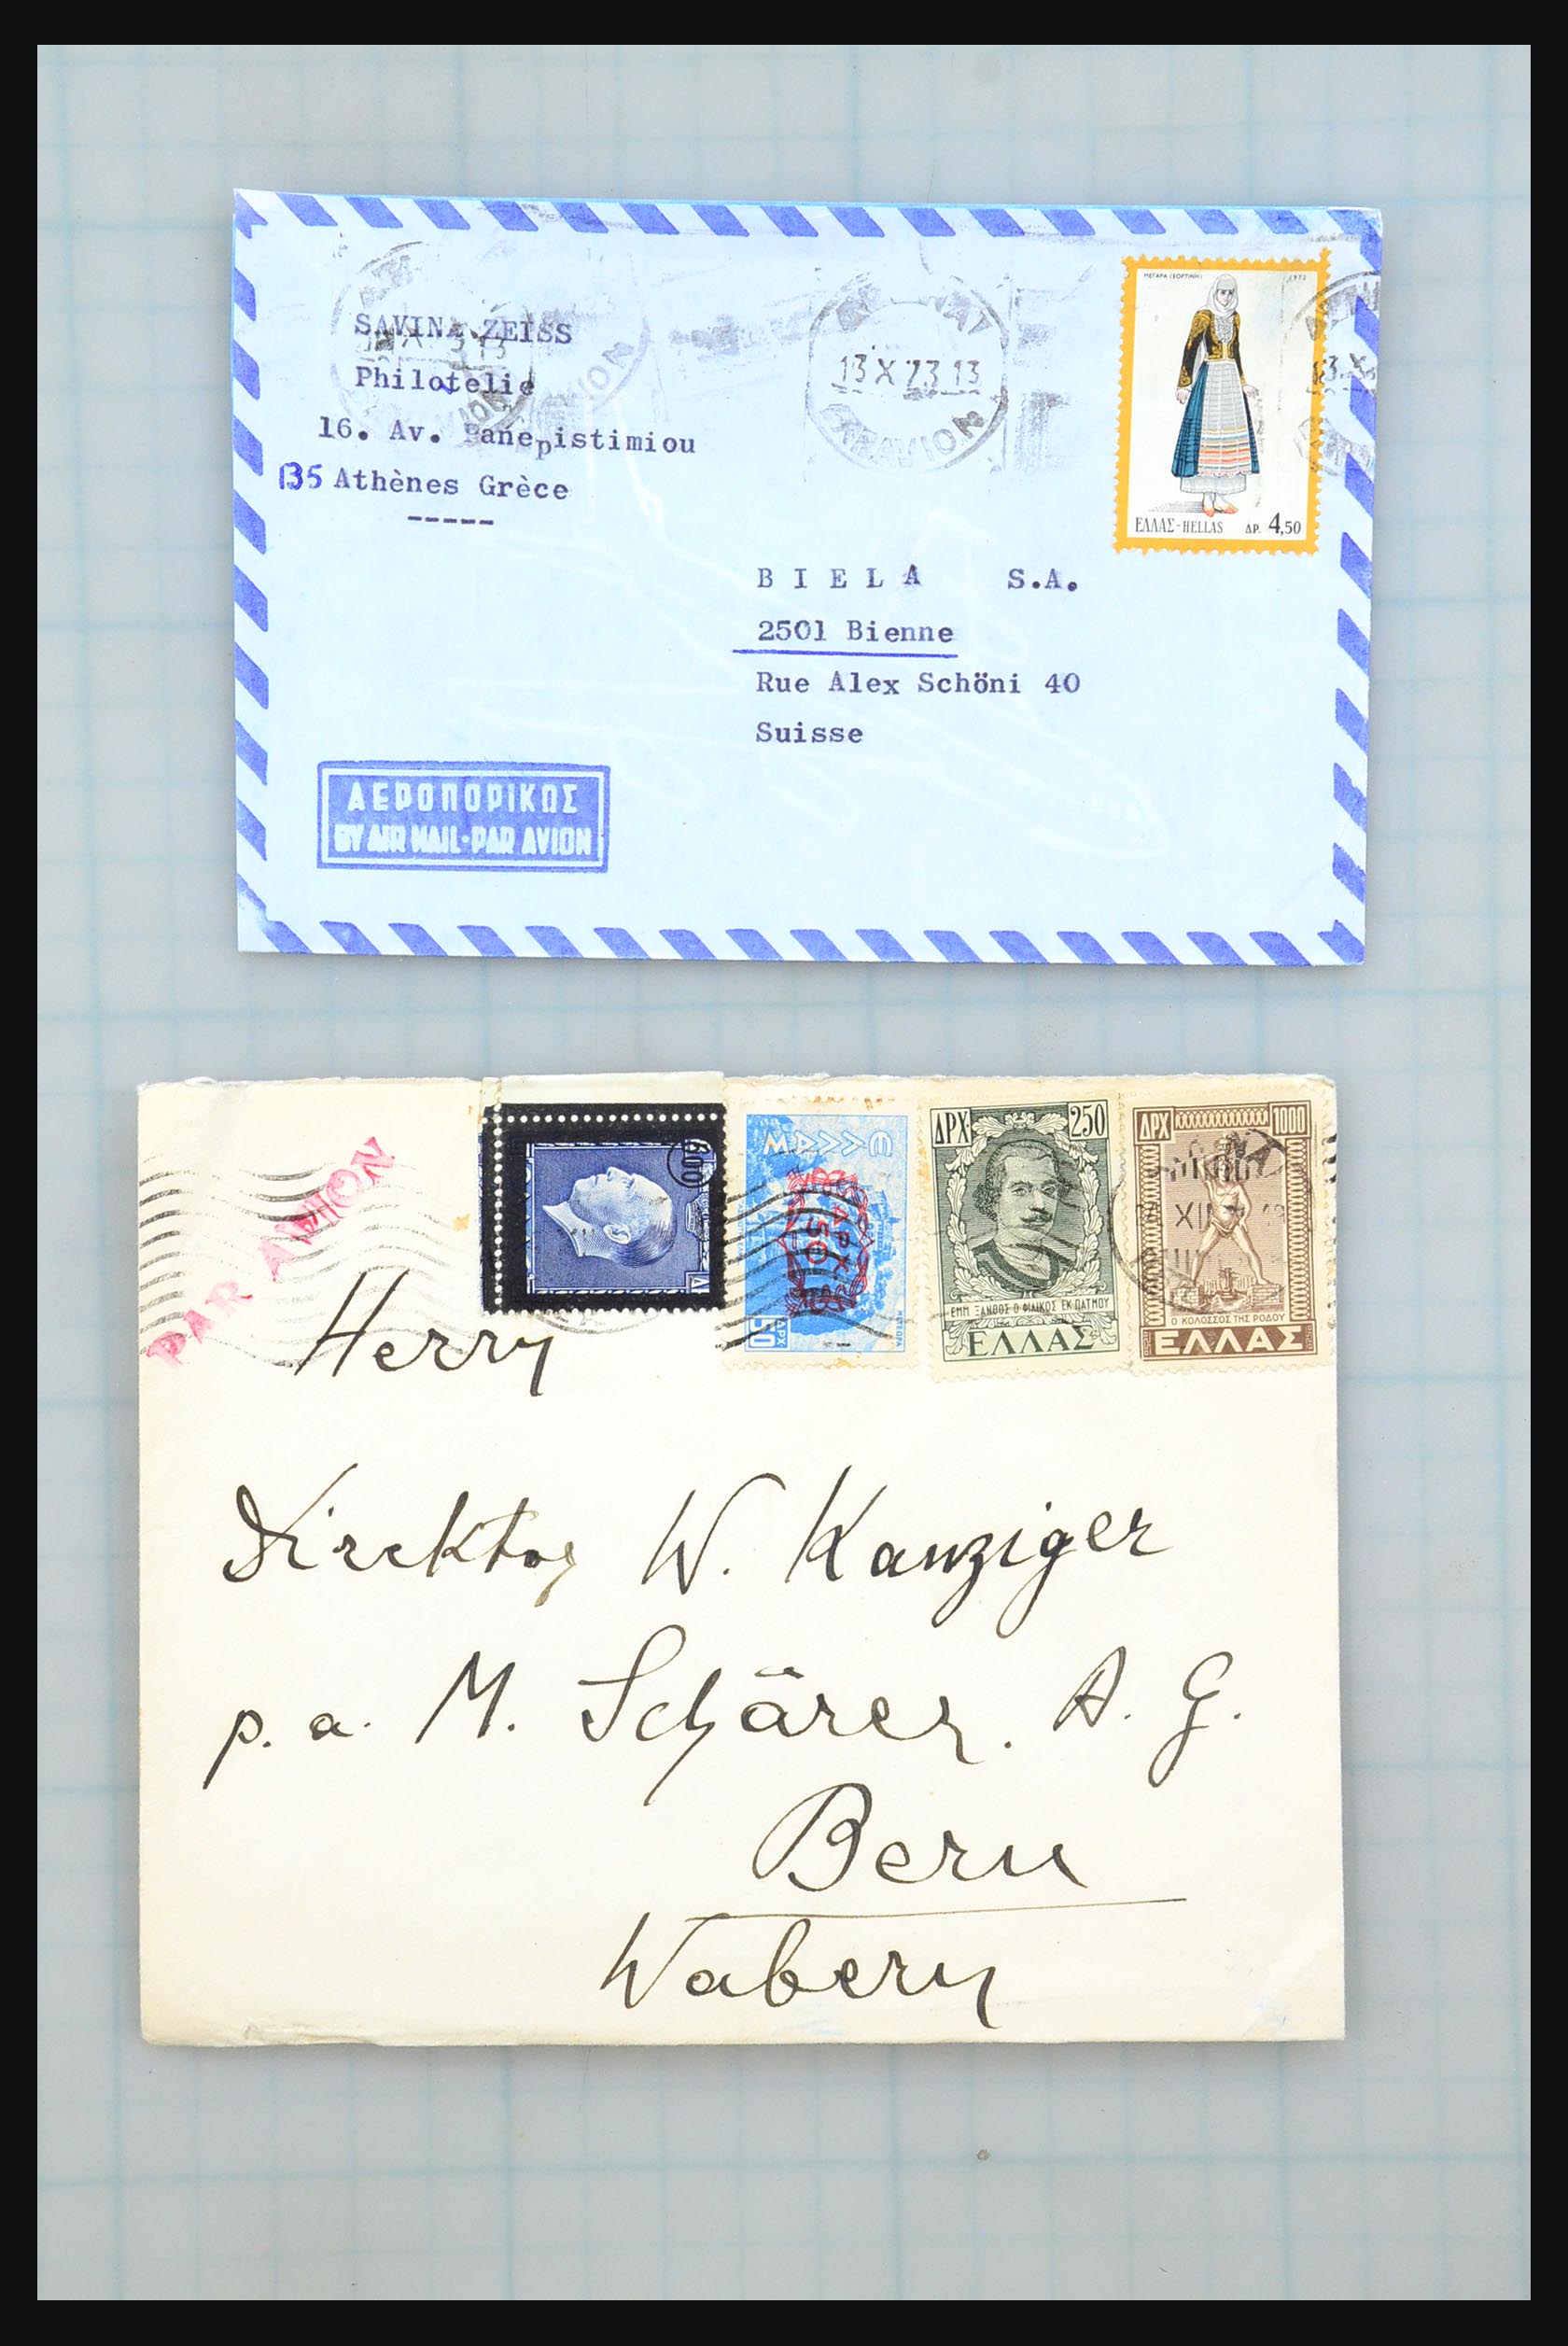 31358 088 - 31358 Portugal/Luxemburg/Greece covers 1880-1960.